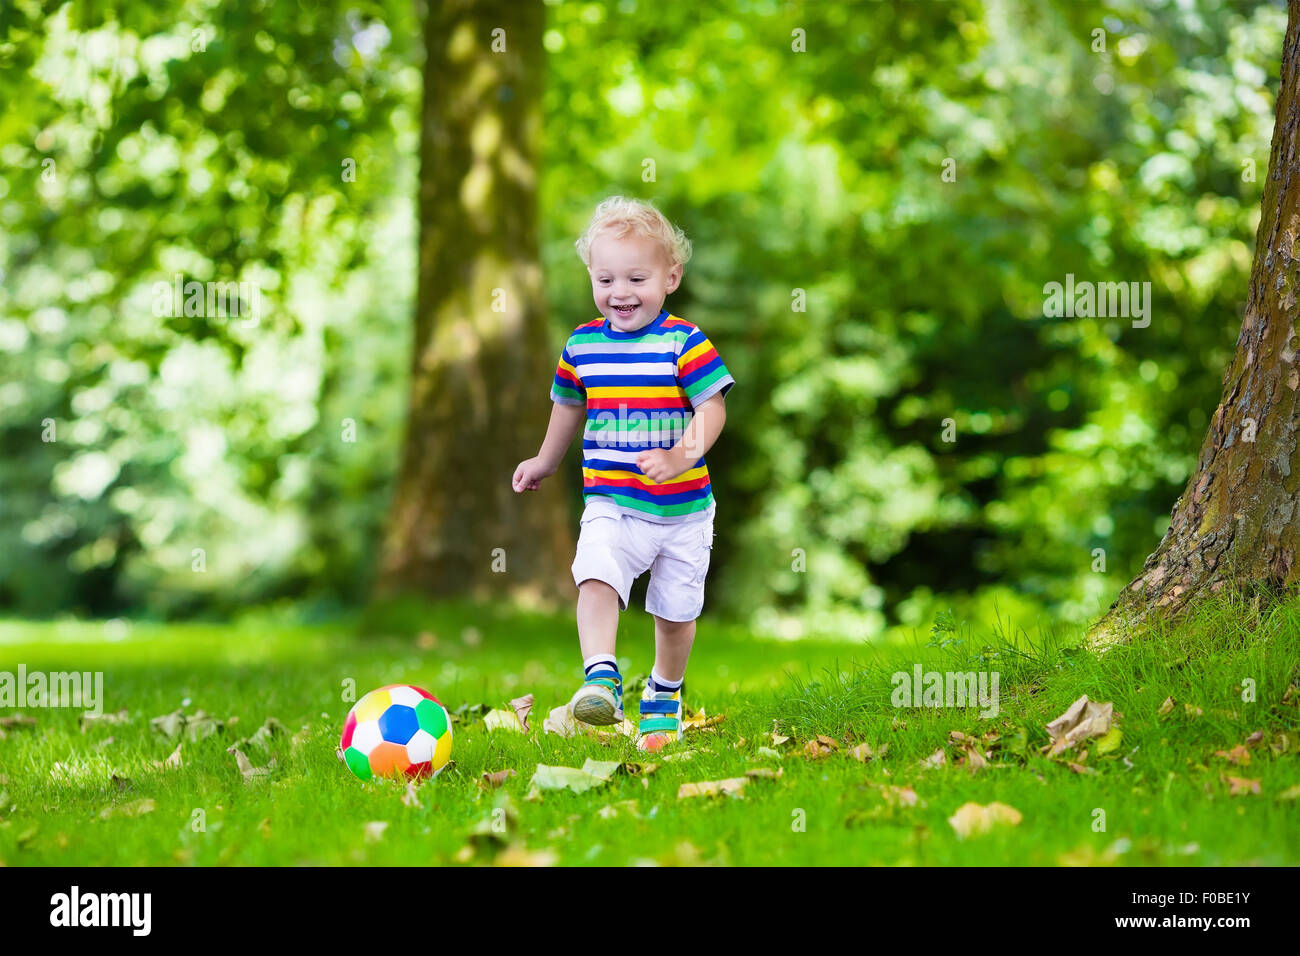 Happy child playing European football outdoors in school yard. Kids play soccer. Active sport for preschool child. Stock Photo